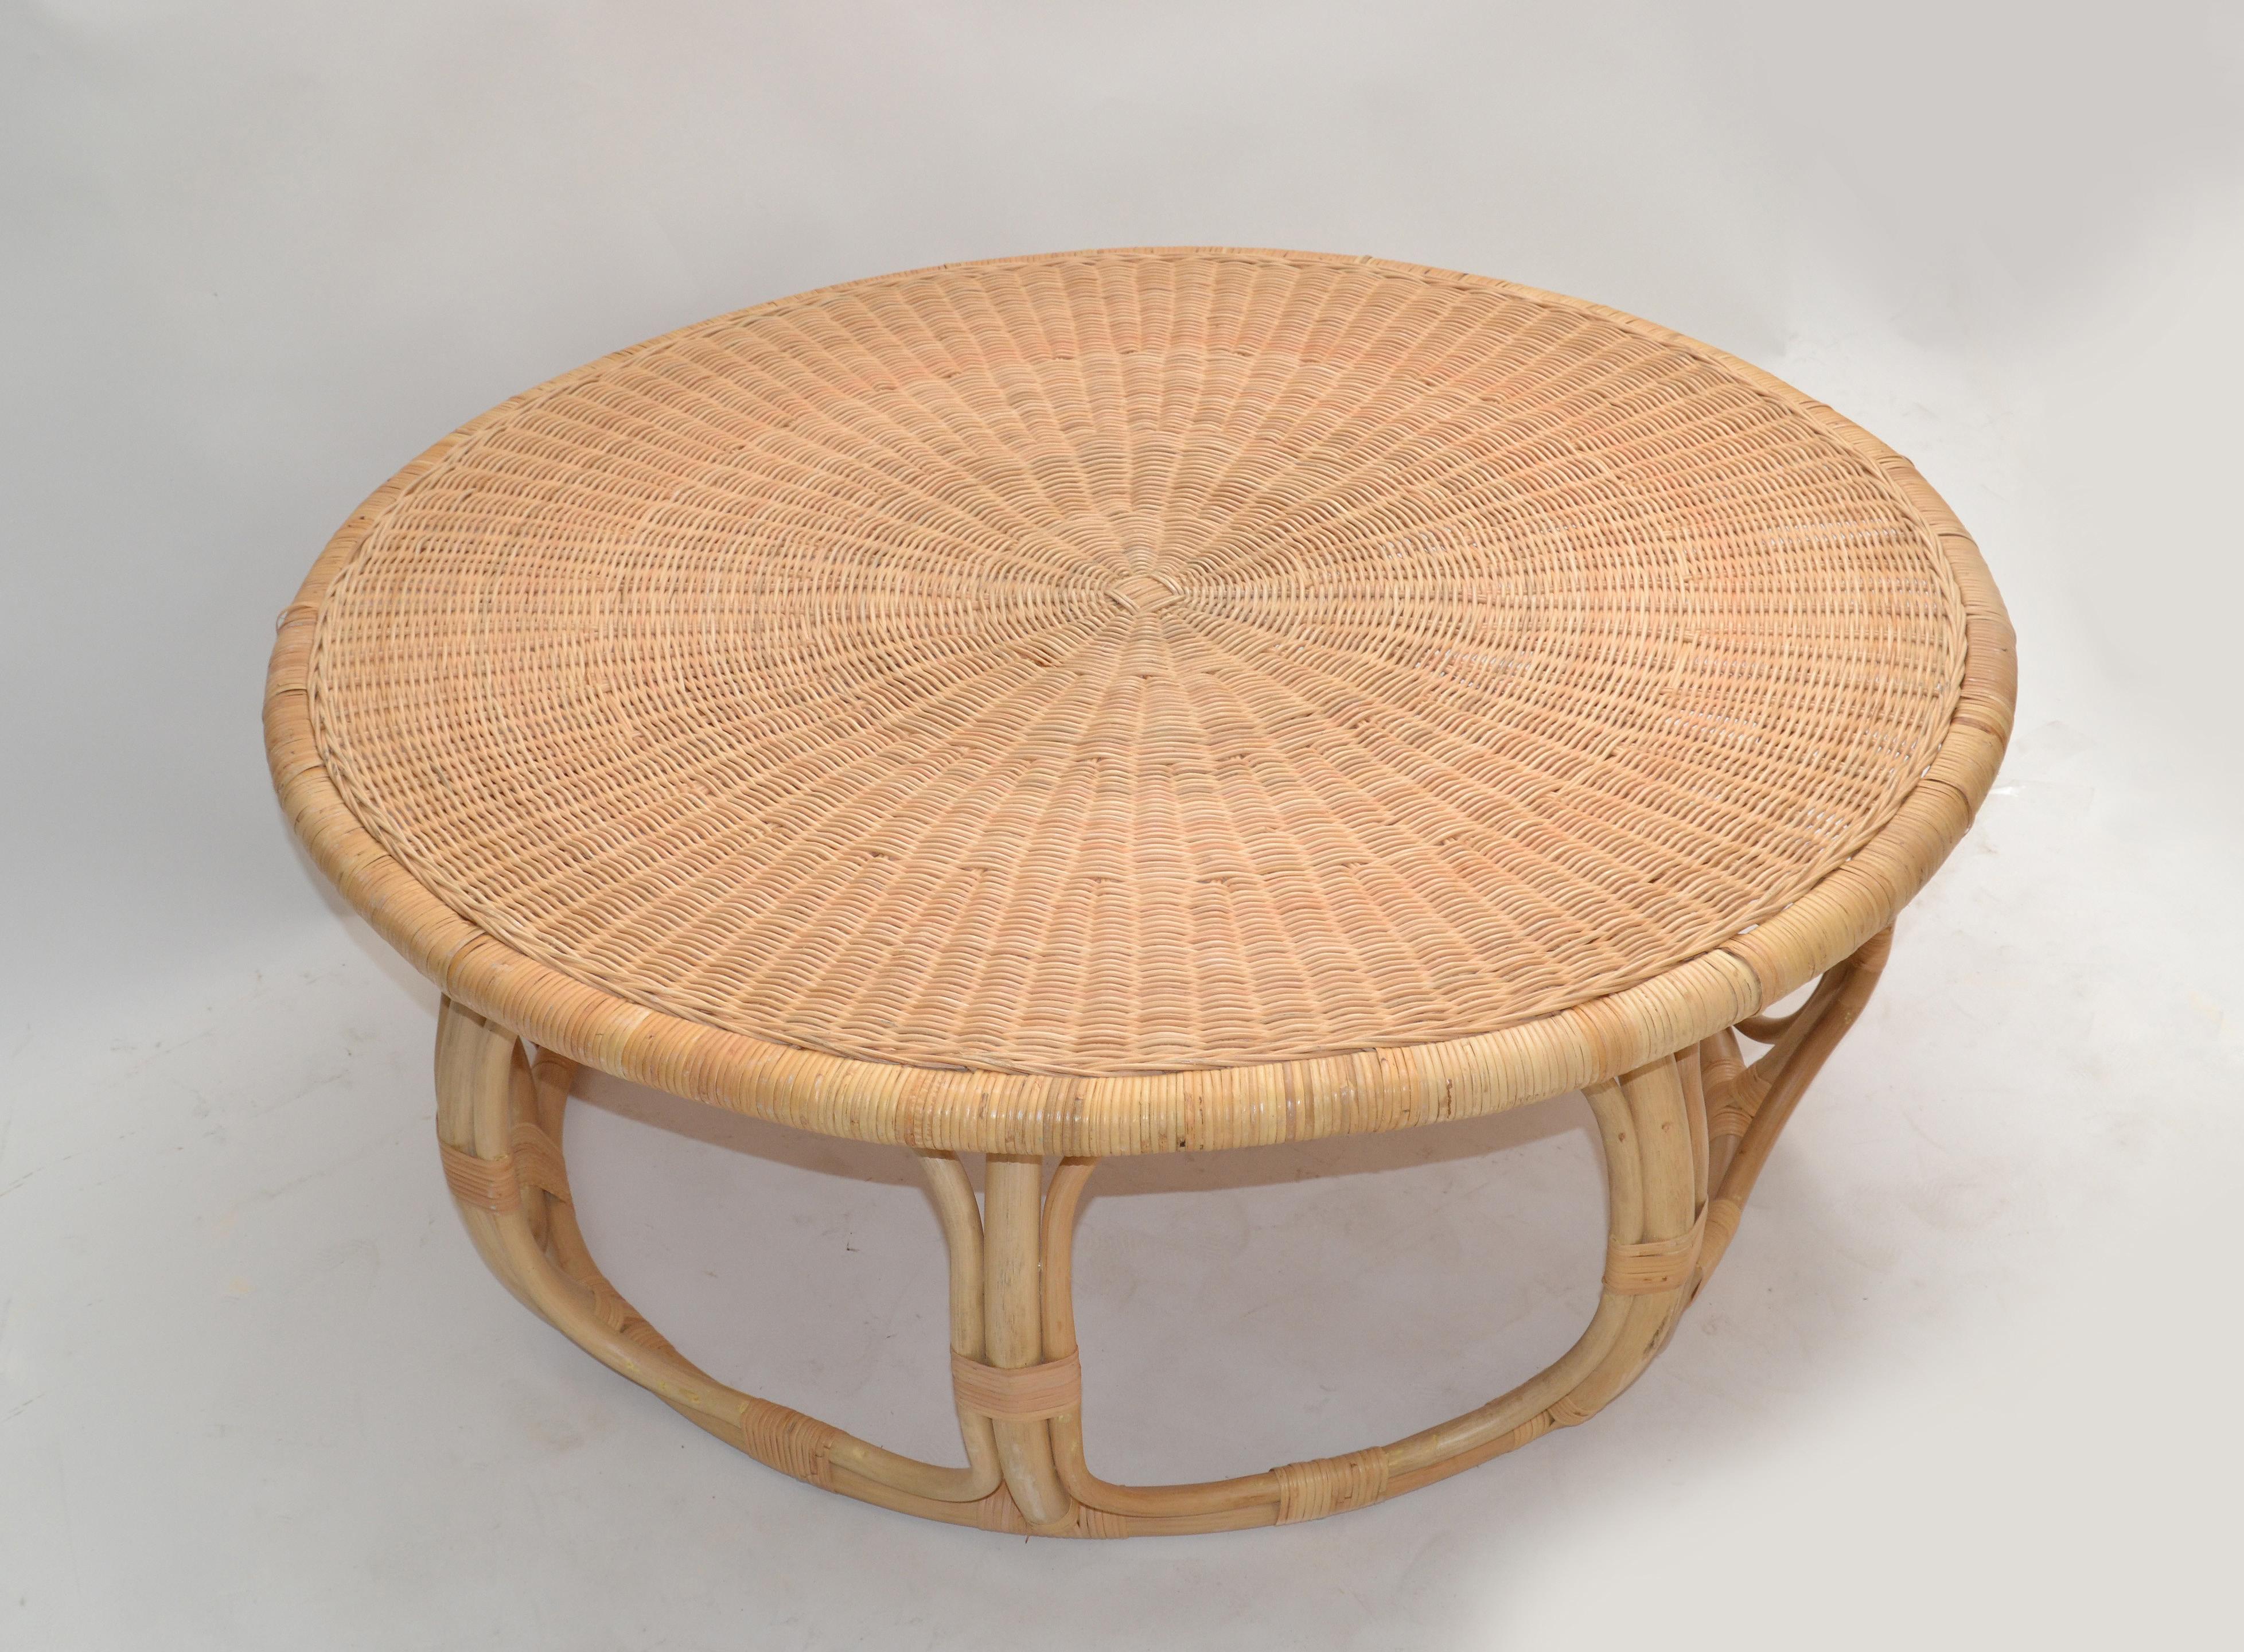 Organic Modern Round Handwoven Rattan / Wicker Coffee or Cocktail Table 1990 3